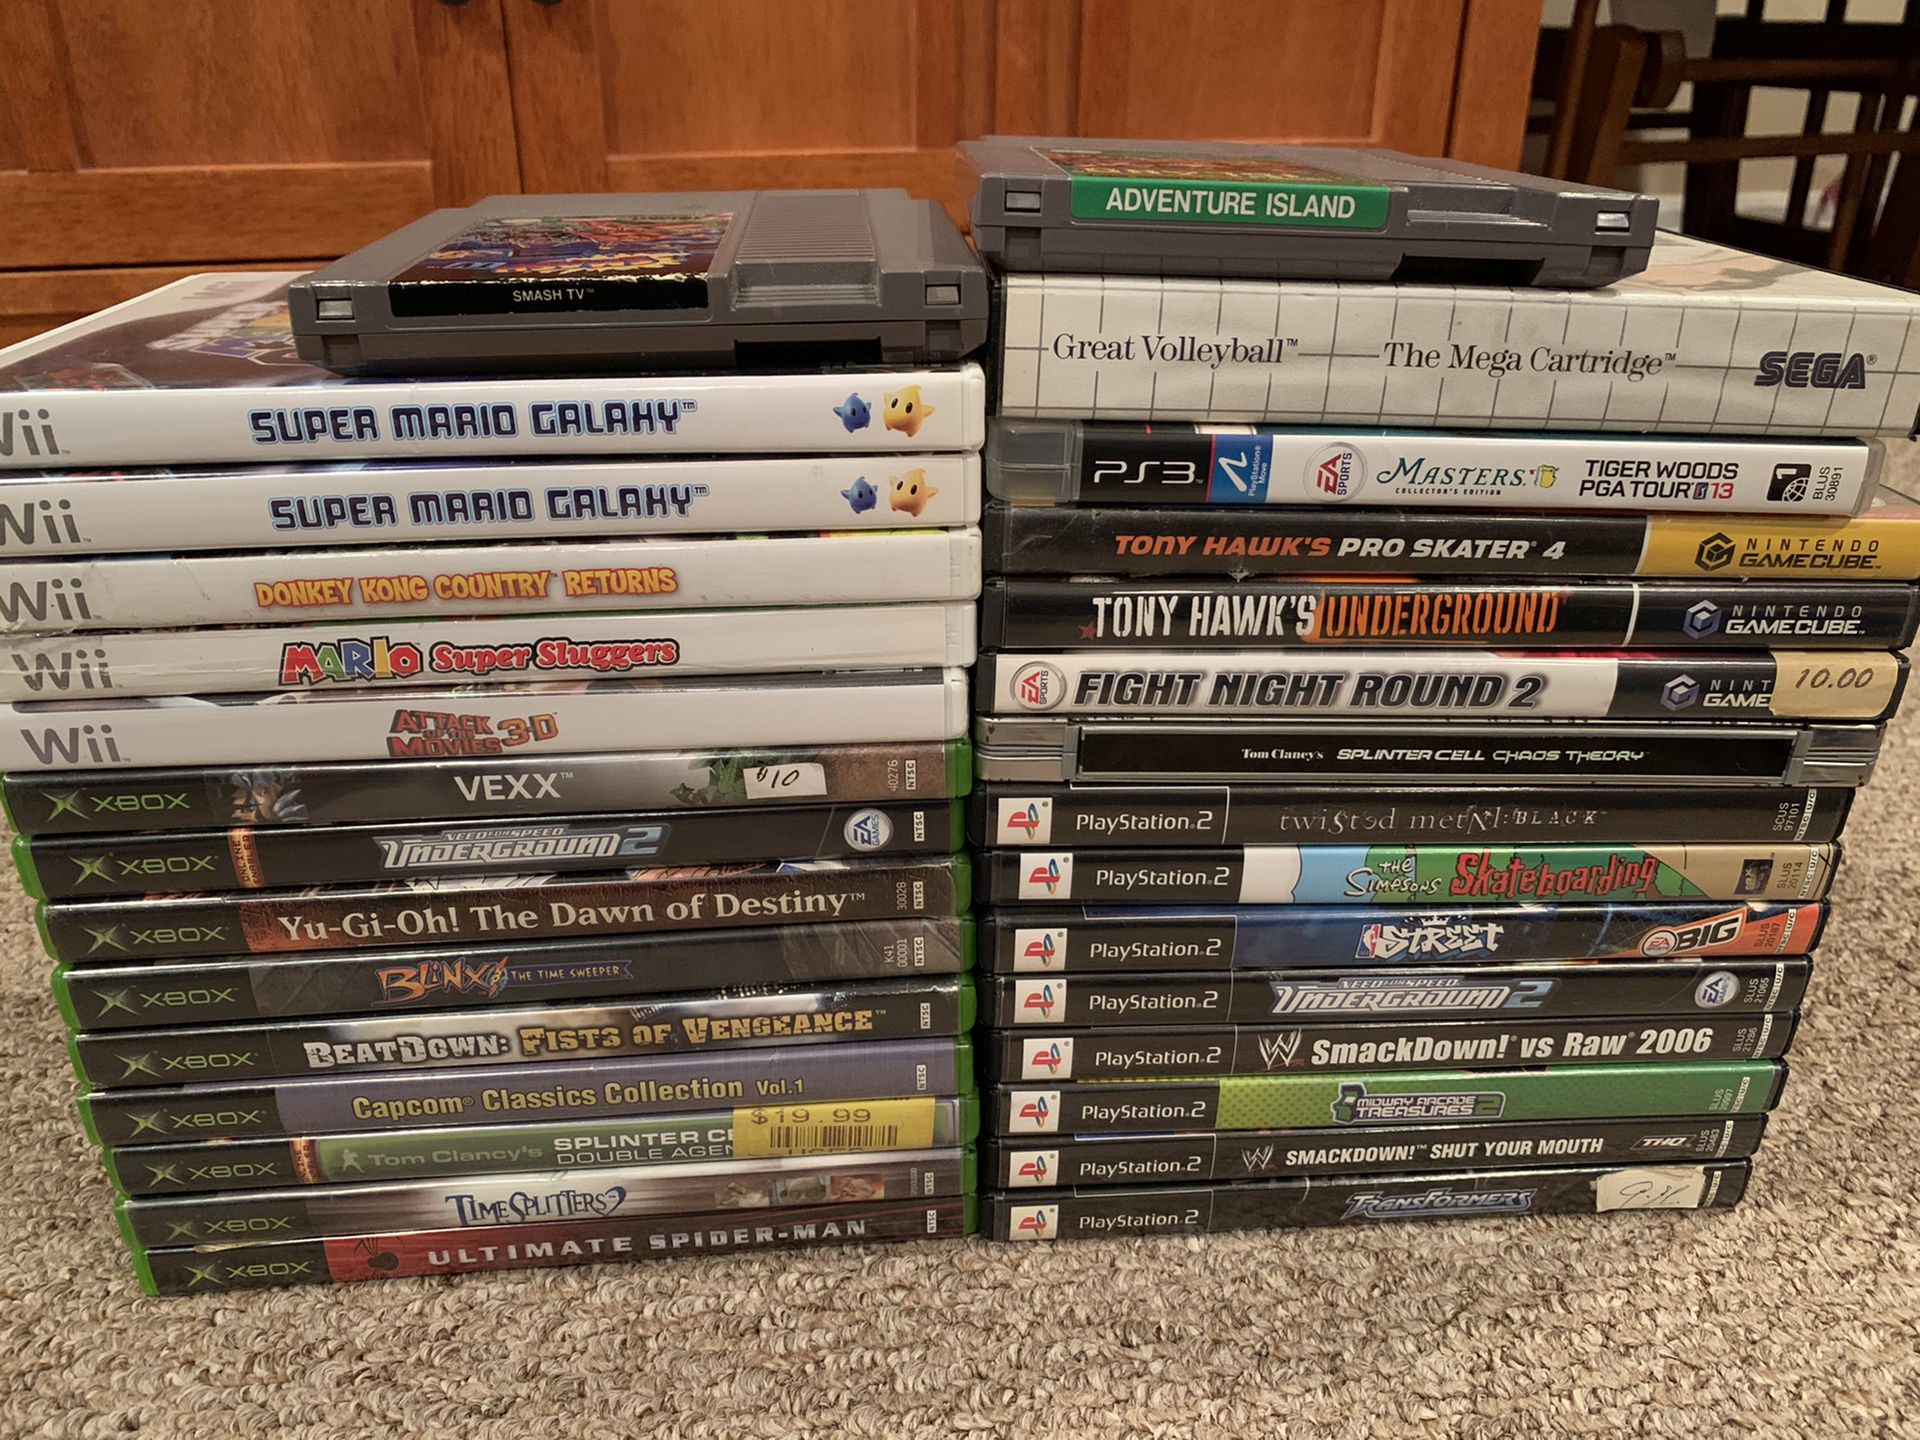 Nintendo, Wii, Xbox and PlayStation 2 games